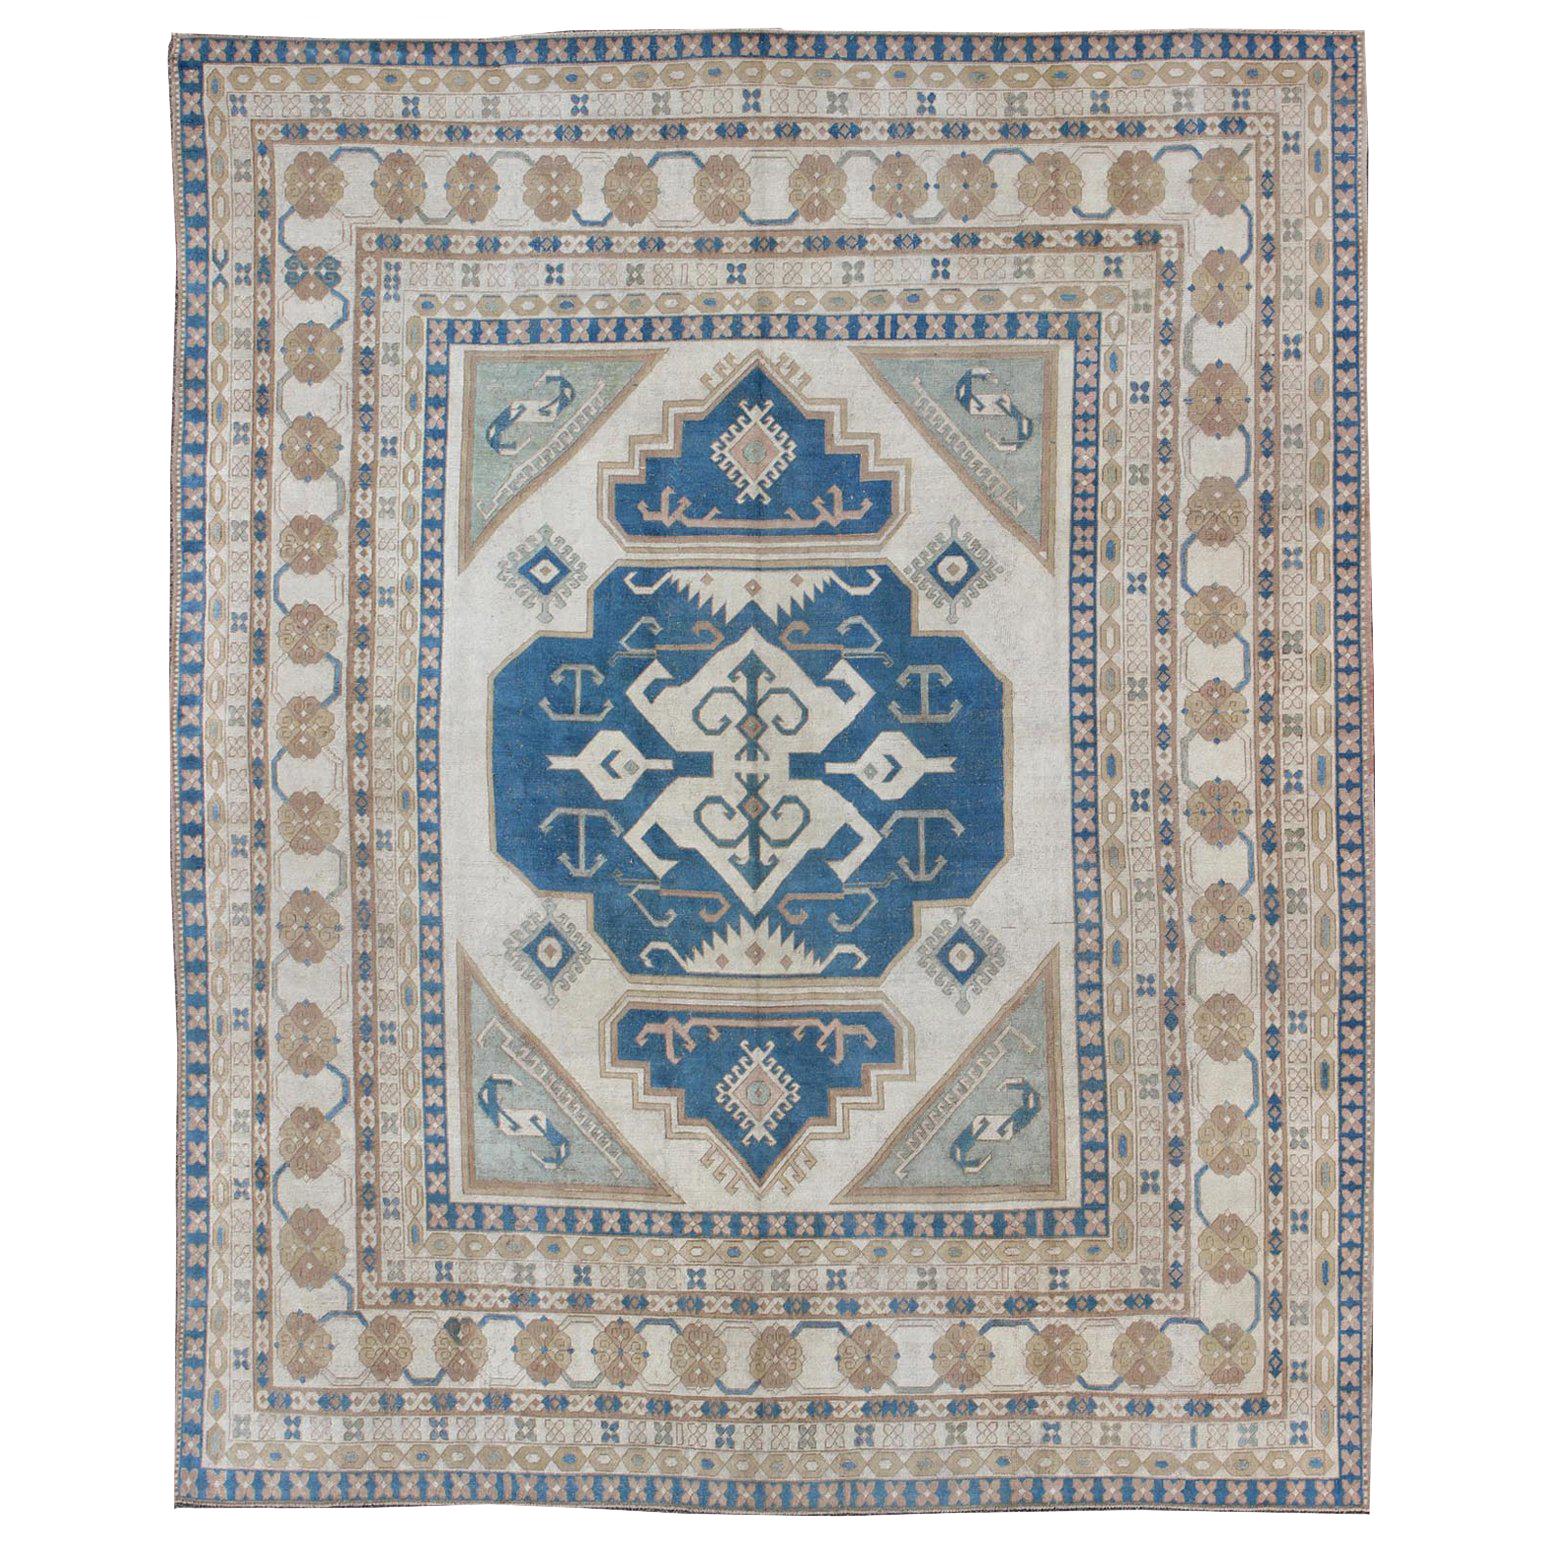 Large Vintage Turkish Rug with Stylized Geometric Design in Blue, Ivory, Tan For Sale